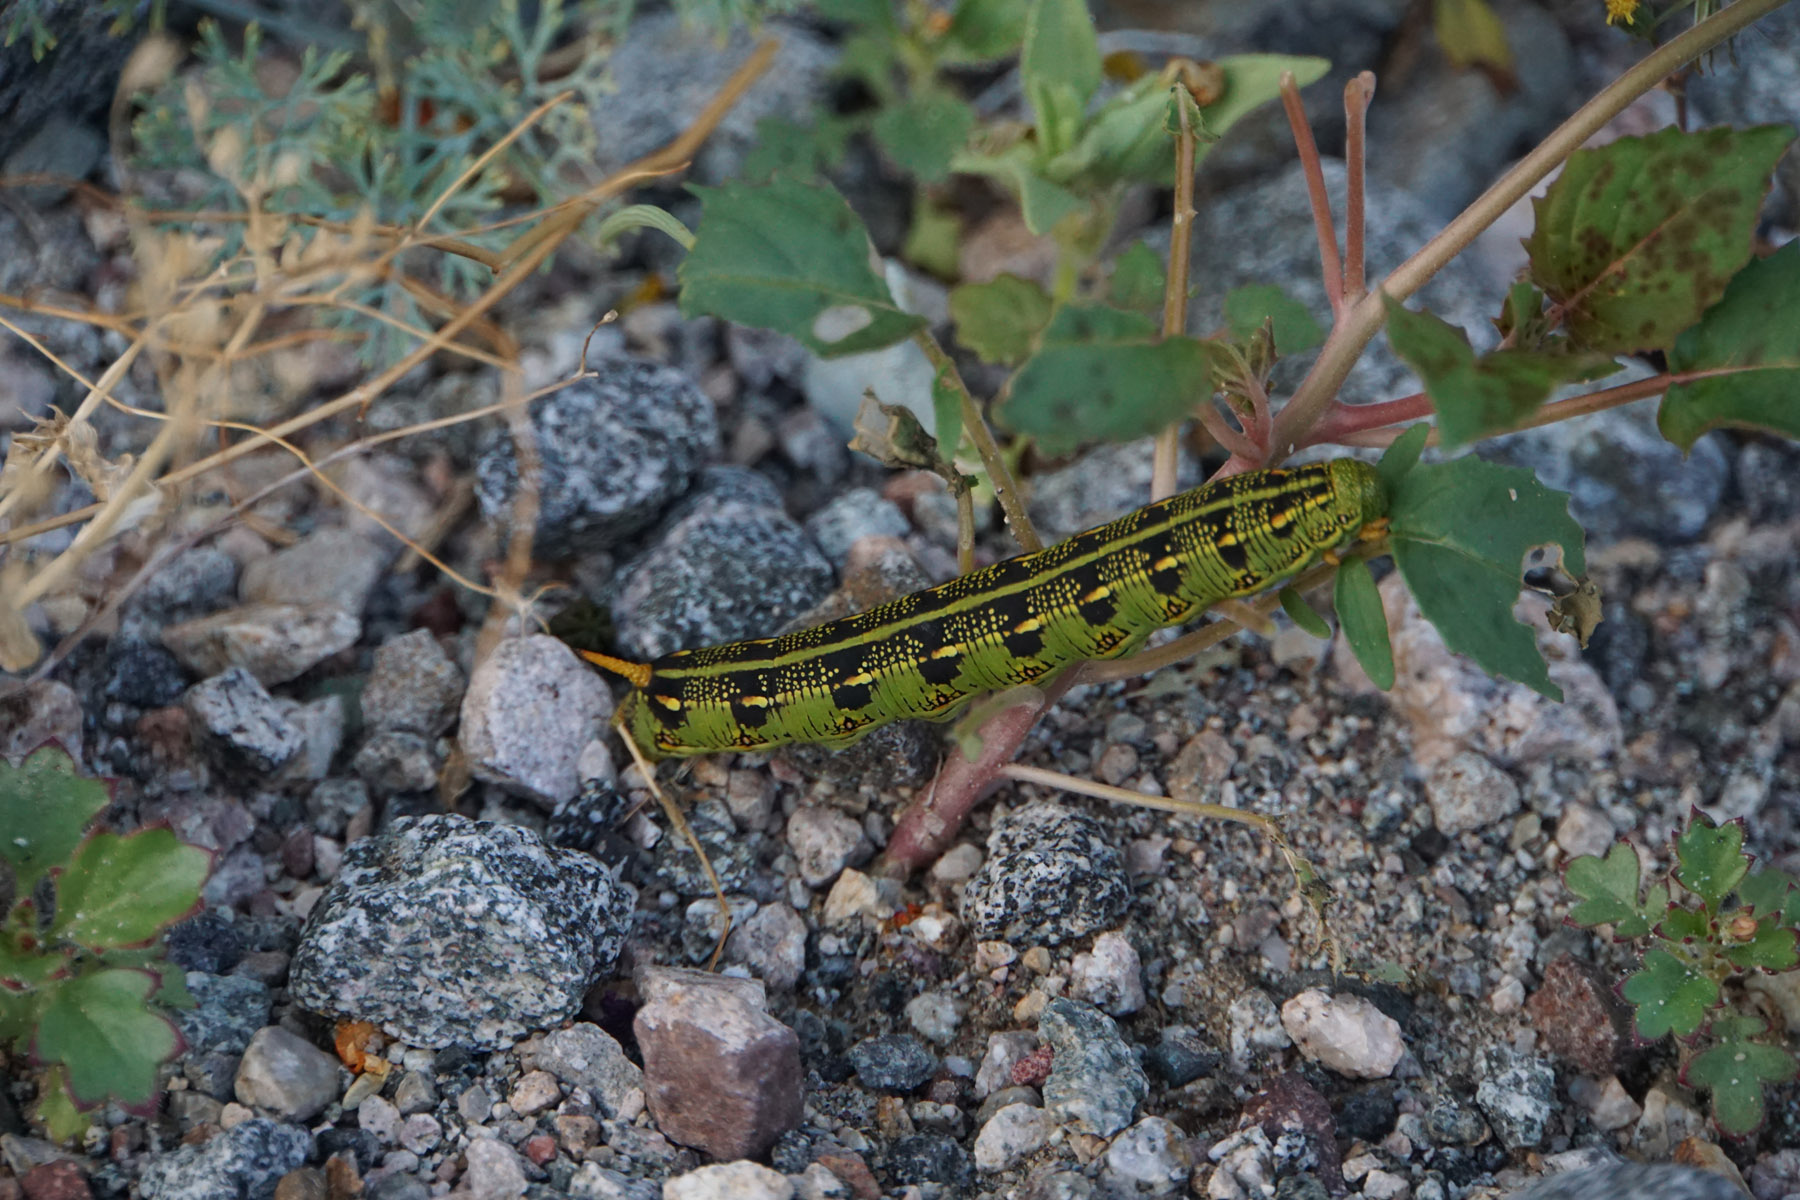 green and black caterpillar with spike horn